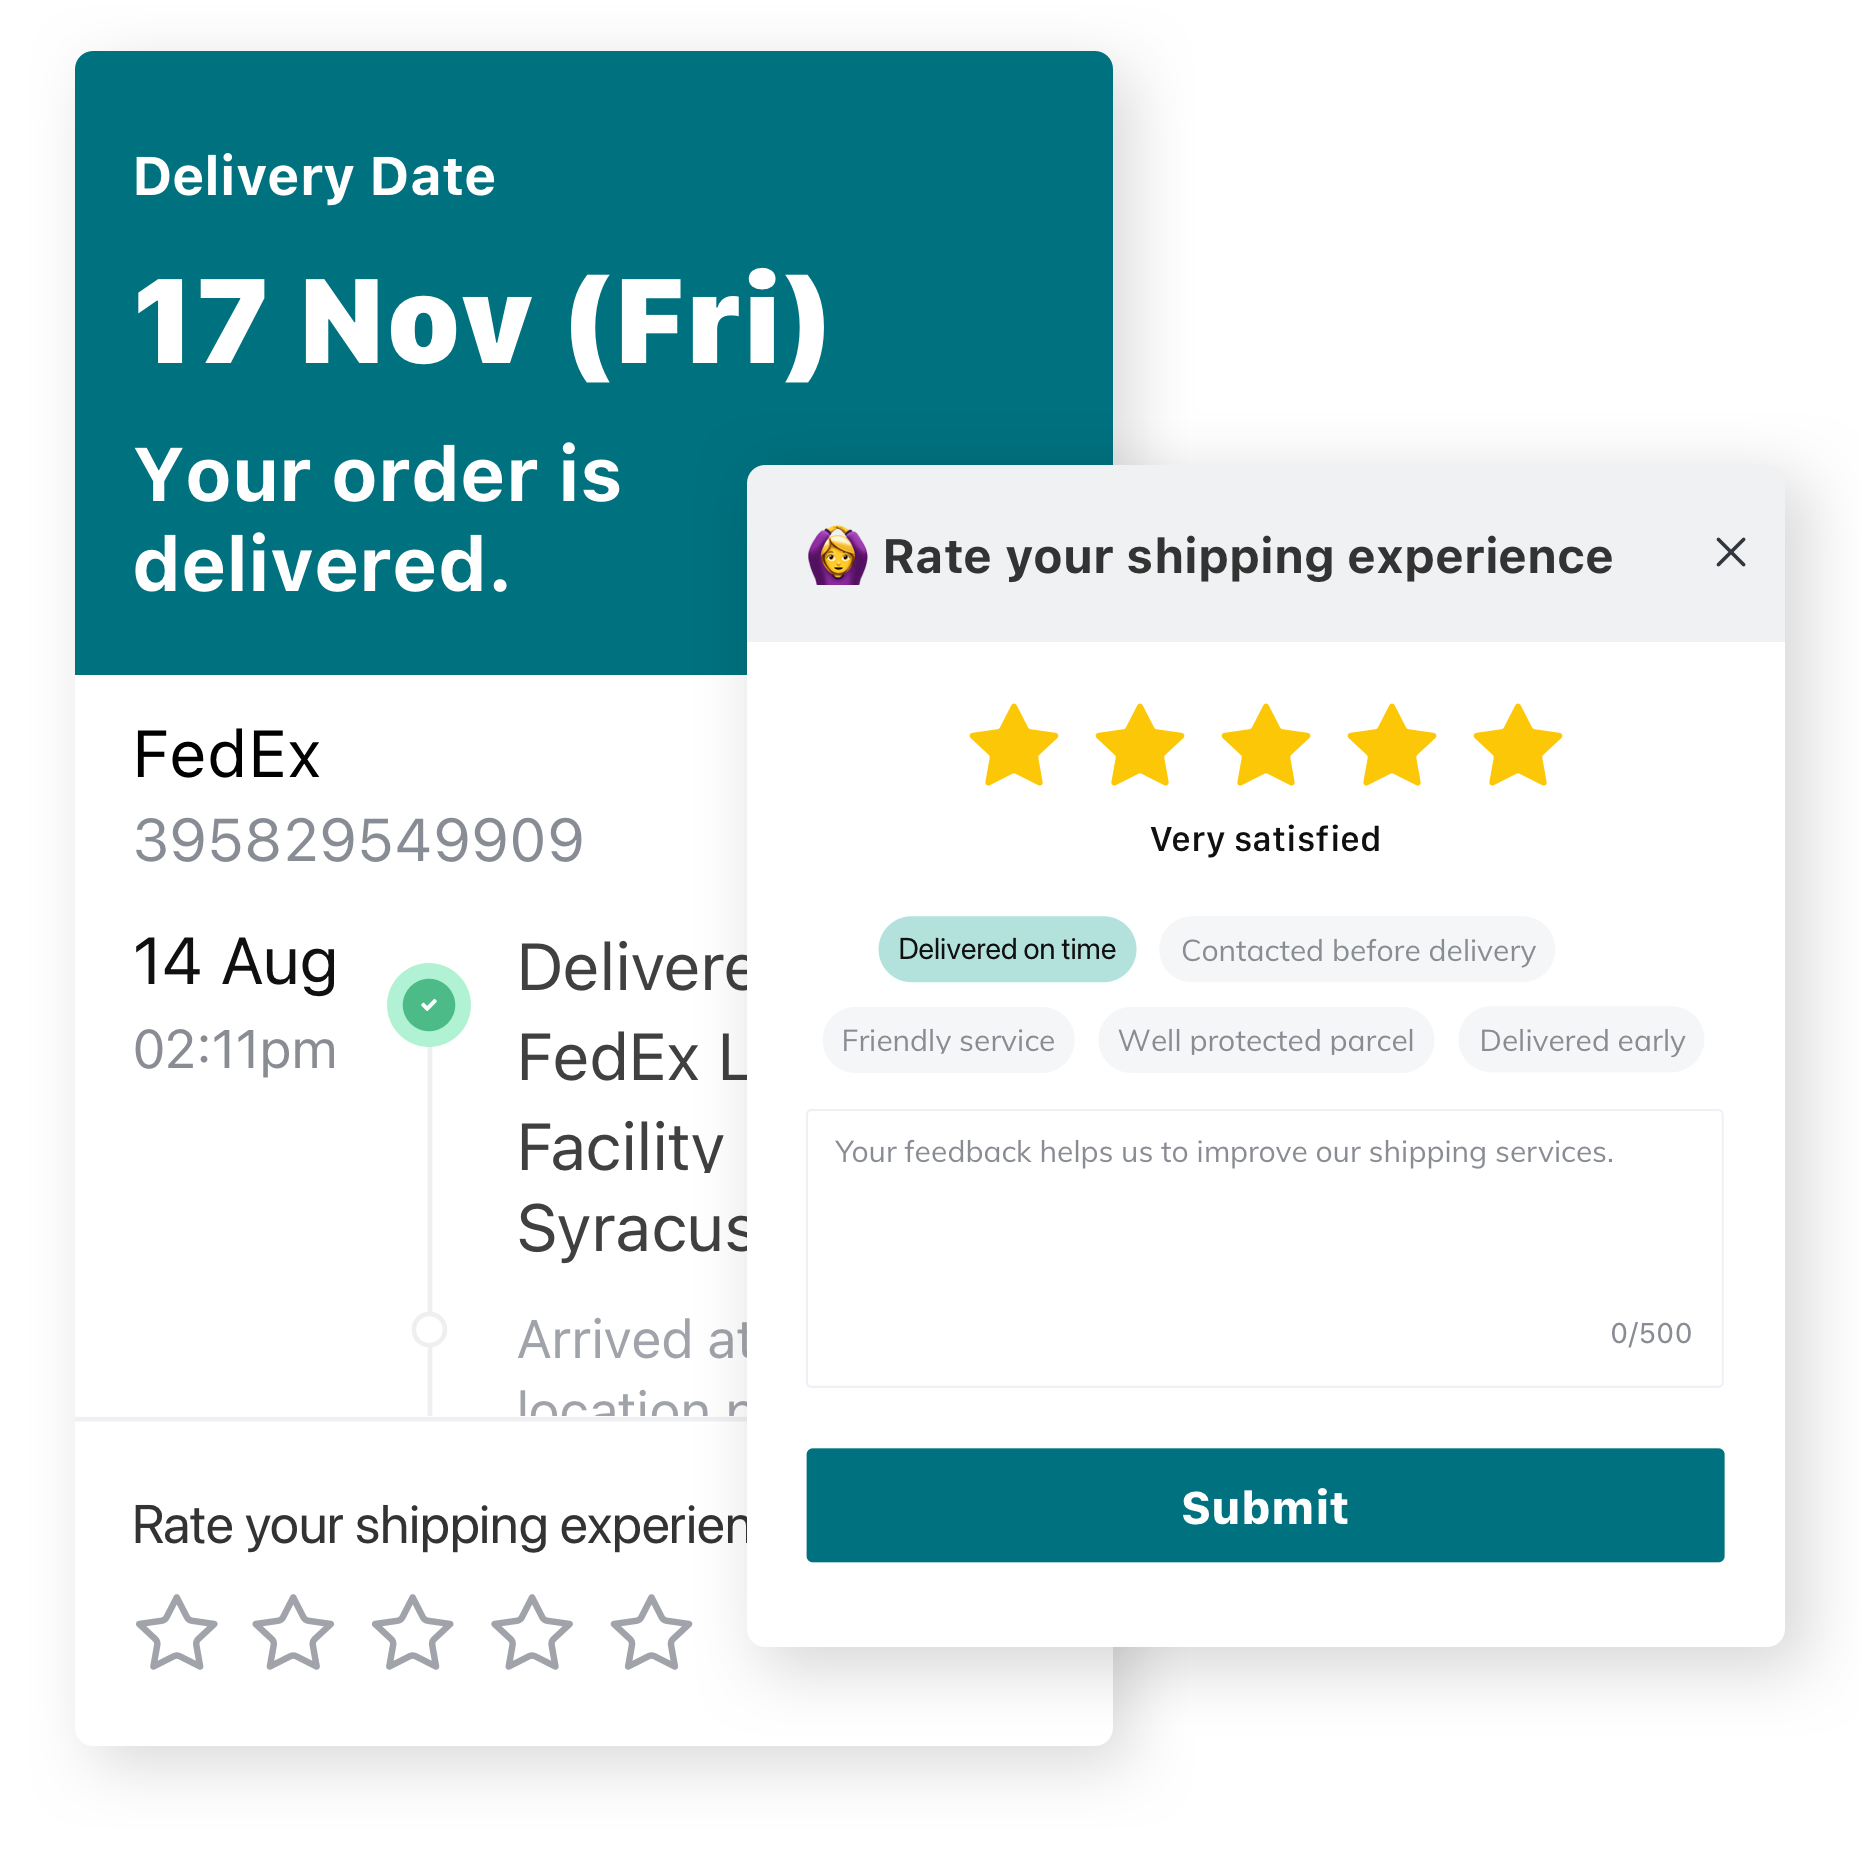 AfterShip new features: Customer reviews, mobile tracking app and more